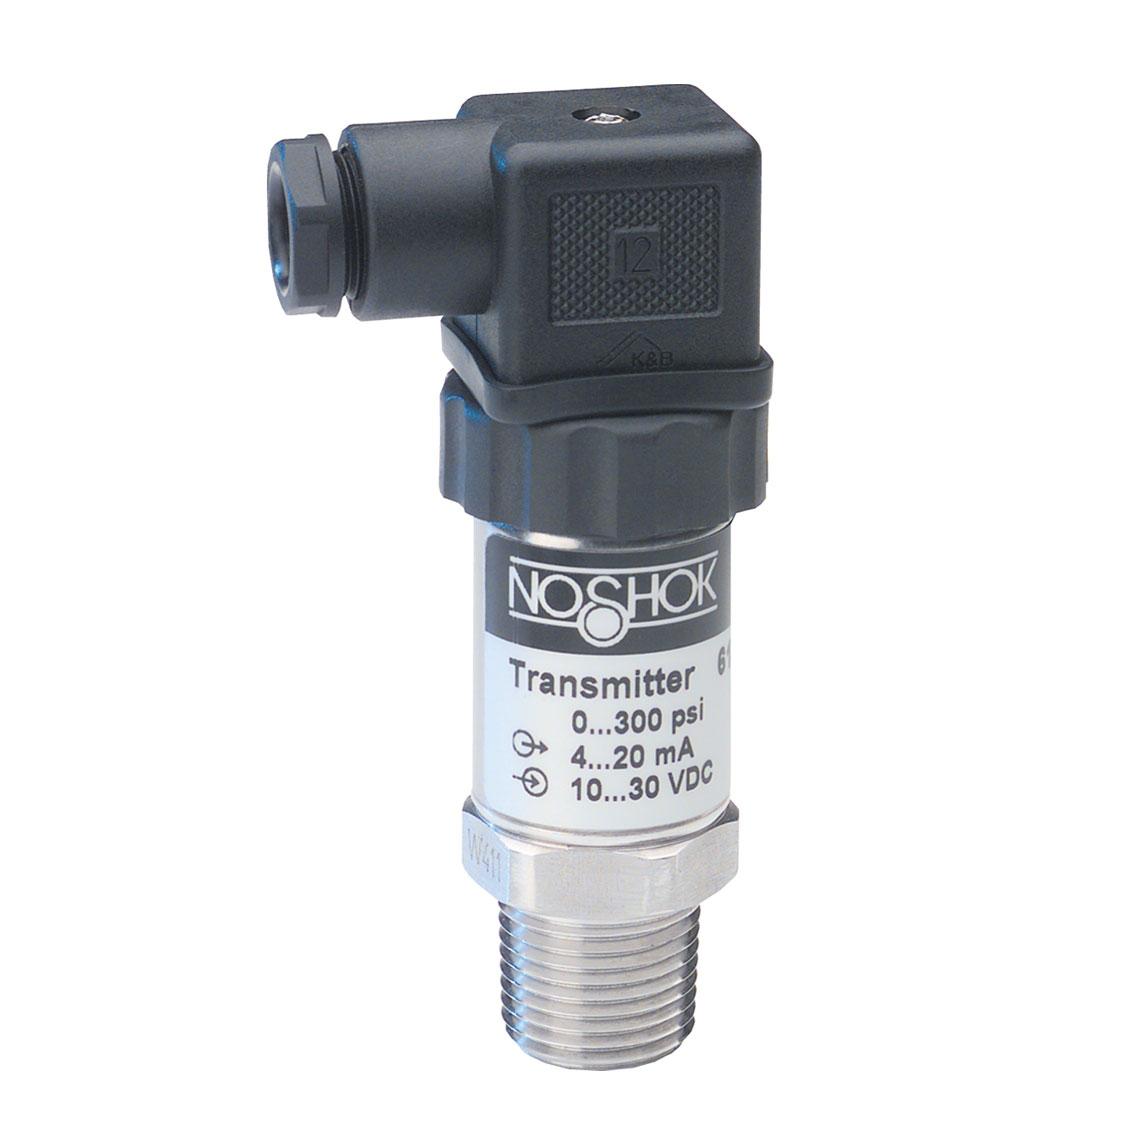 Noshok 615-750-2-1-2-8 0 to 750 psig, 0.125% Accuracy (Best Fit Straight Line (BFSL)), 4 to 20 mA Output, 1/4'' National Pipe Thread (NPT) Male Pressure Transducer with DIN EN 175301-803 Form A Electrical Connection